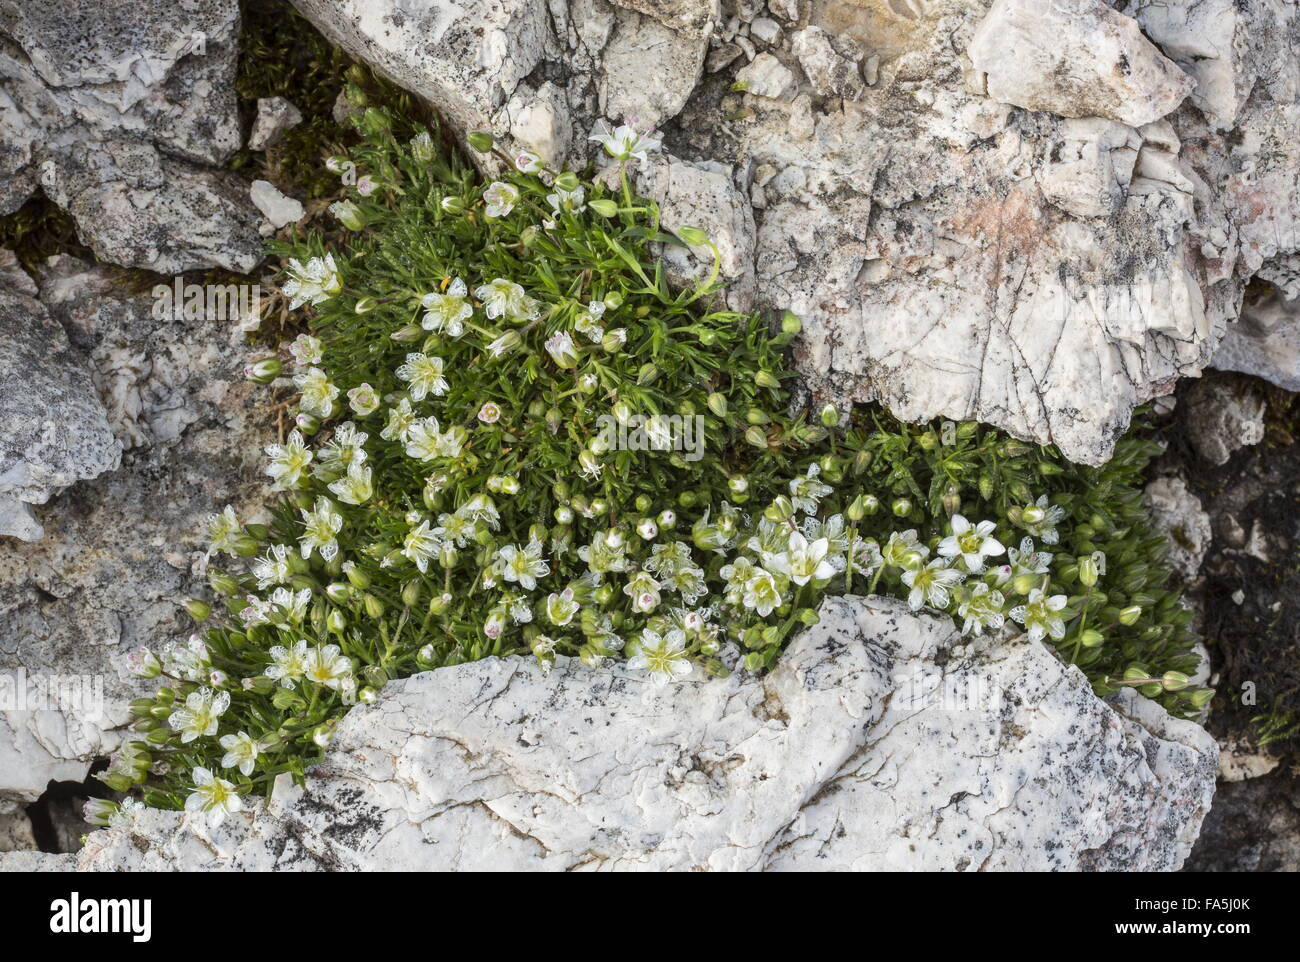 An alpine form of Spring Sandwort, Minuartia verna ssp.collina at 2700 m in the Dolomites. Stock Photo